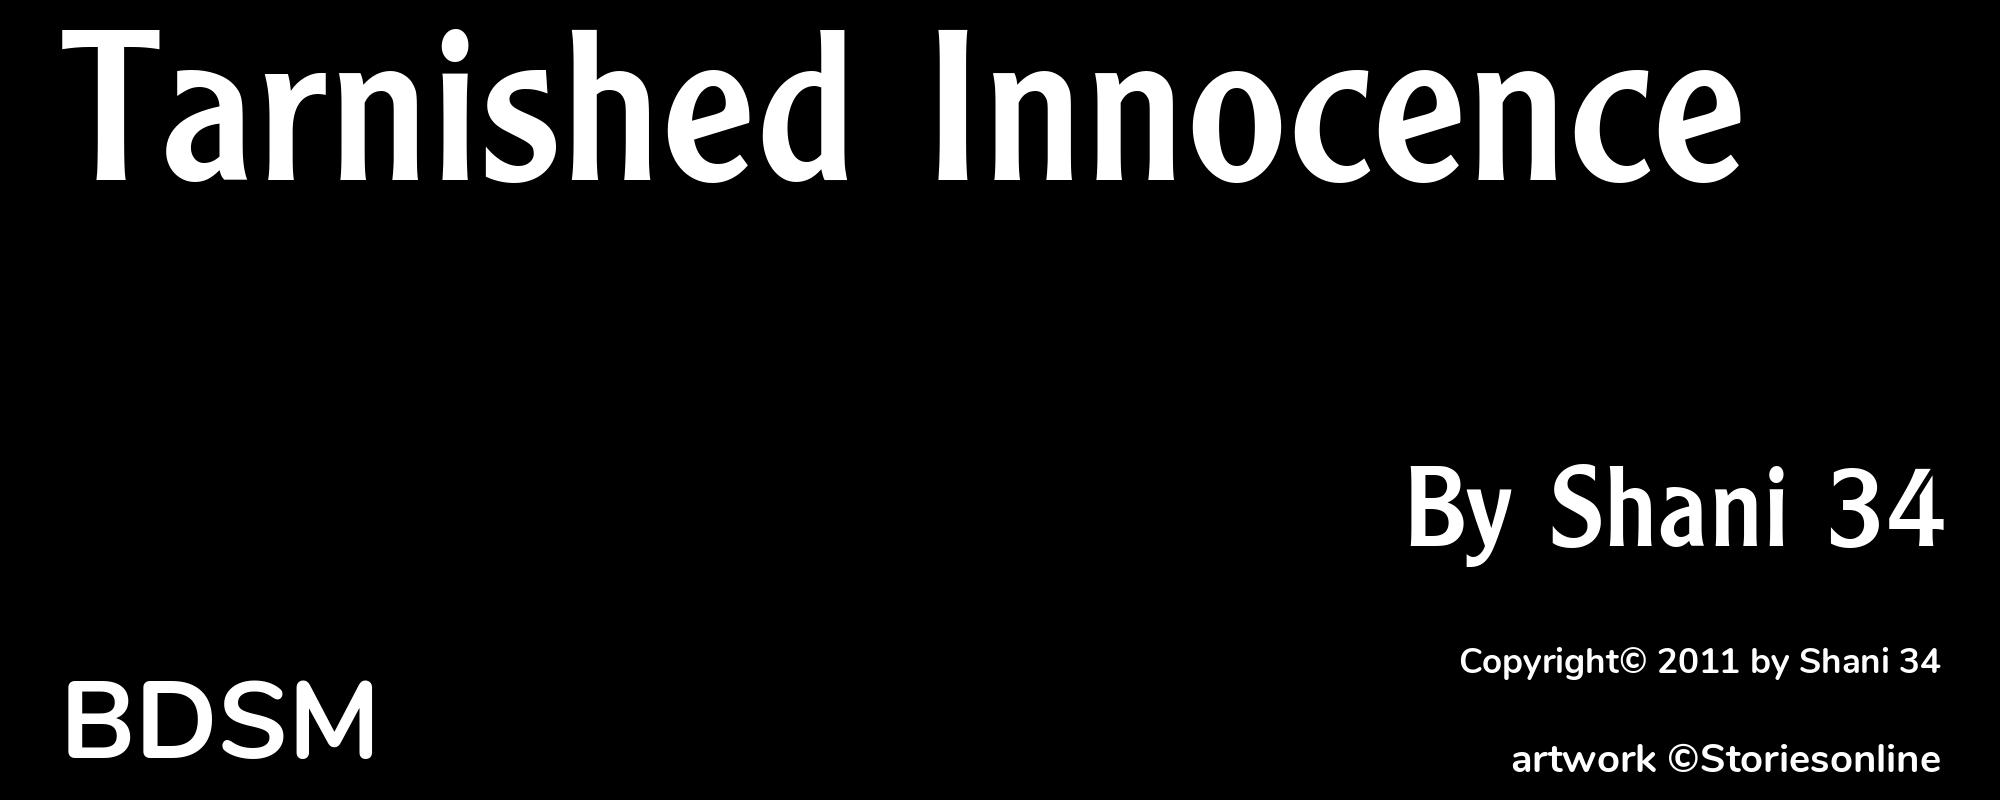 Tarnished Innocence - Cover